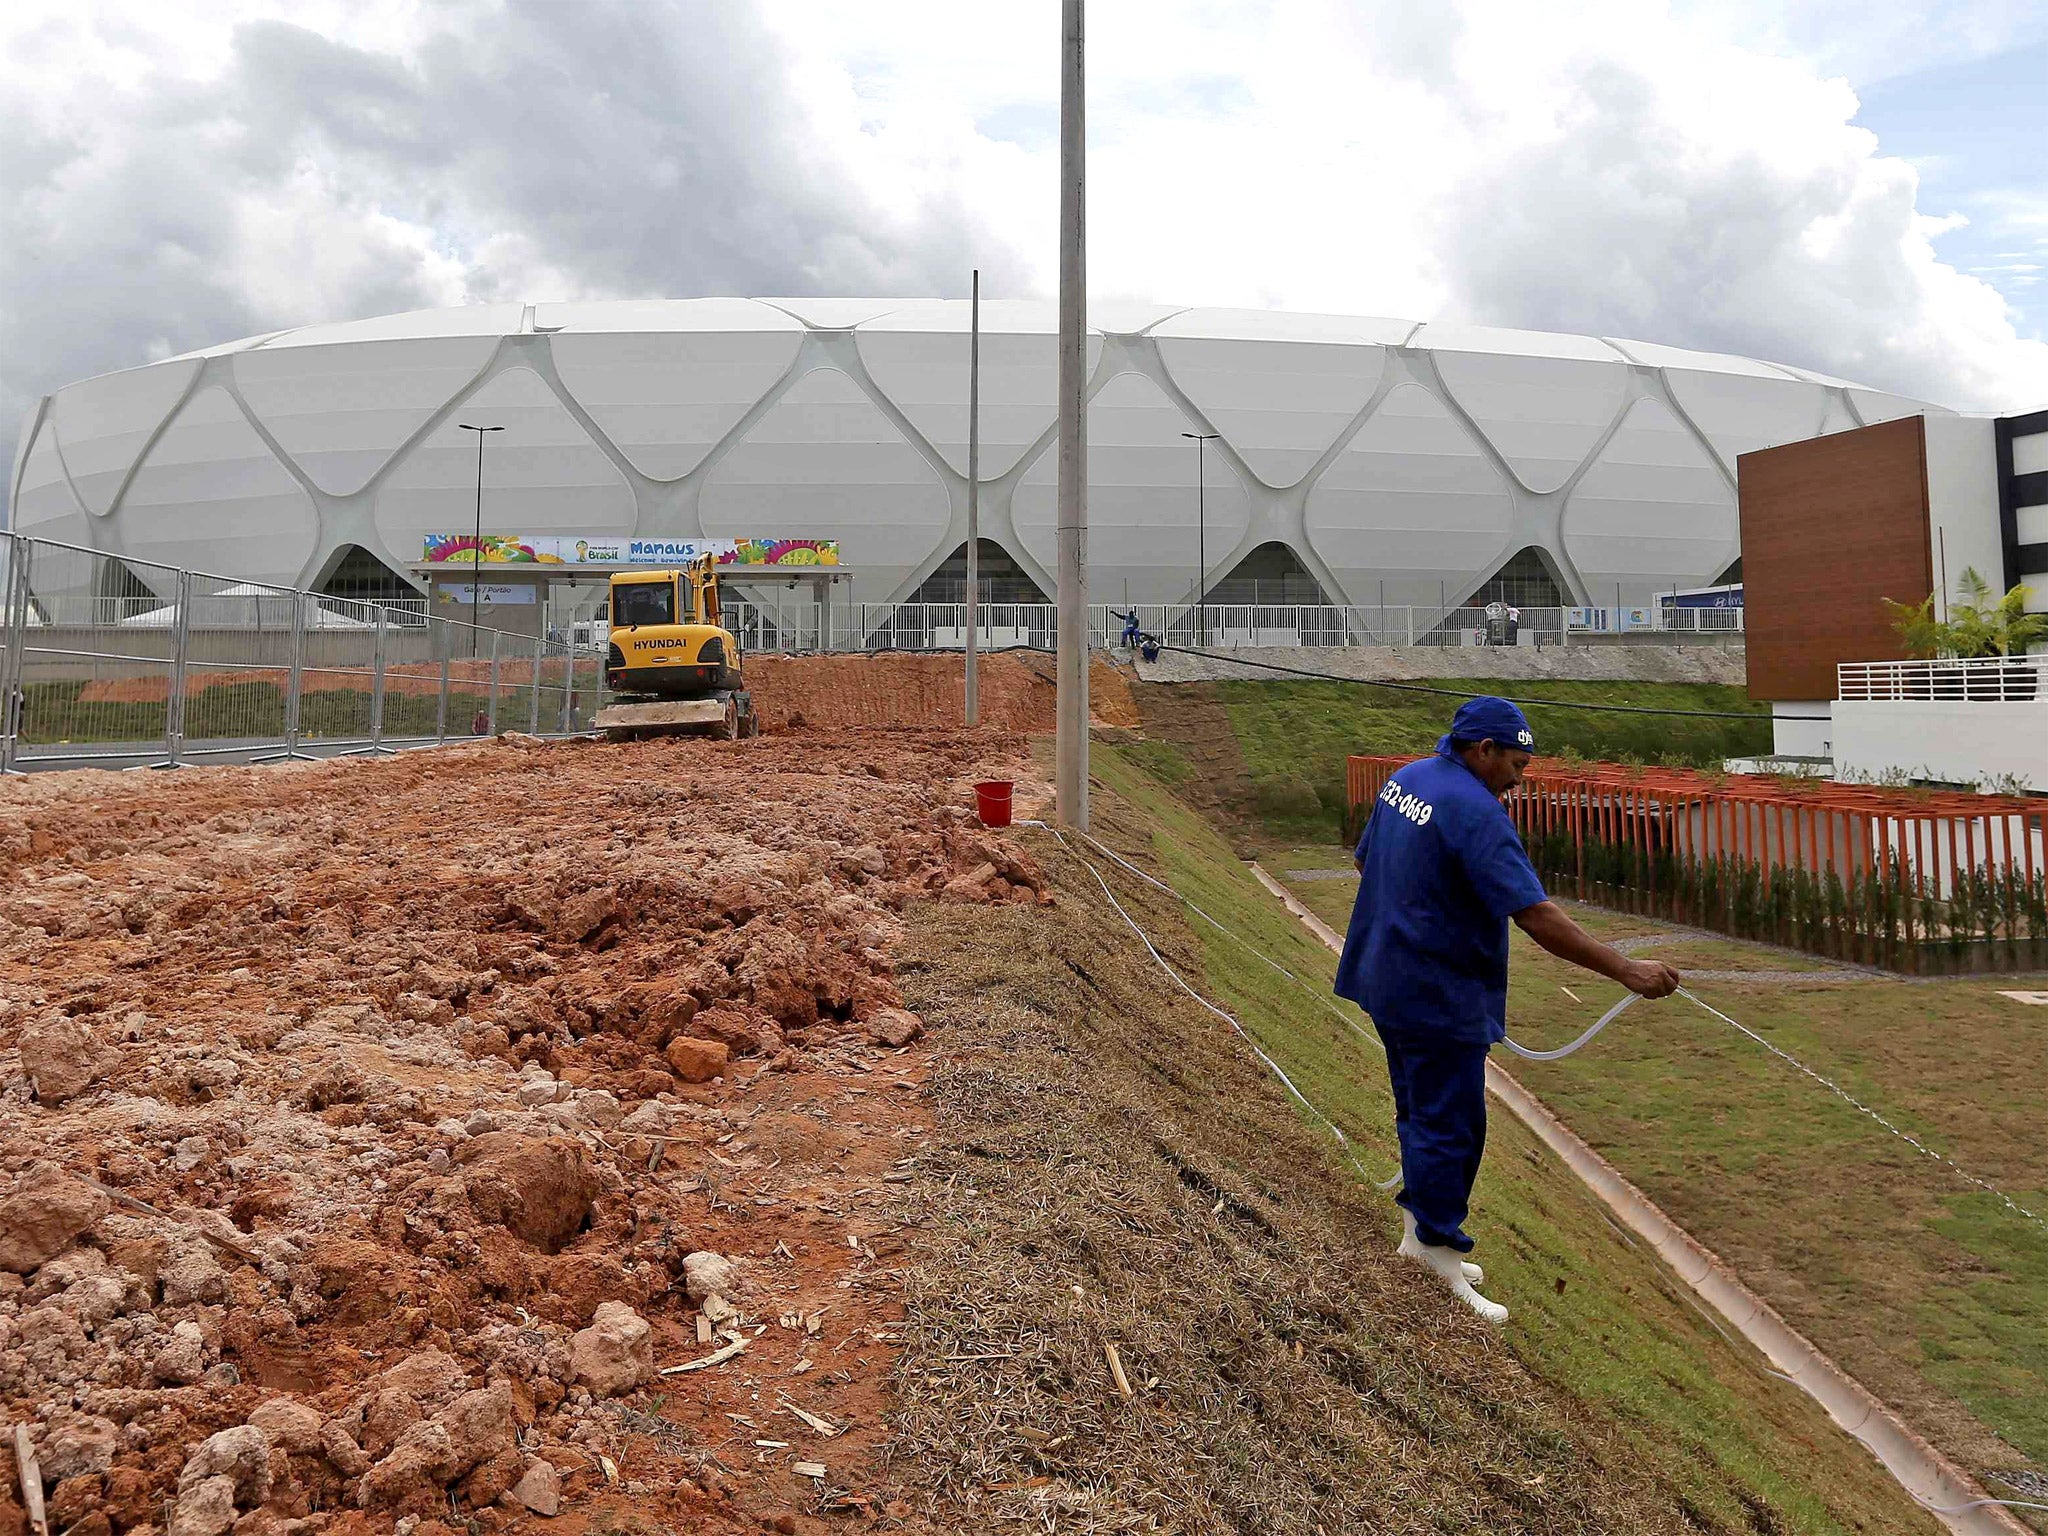 Construction work is still going on nearby the stadium in Manaus